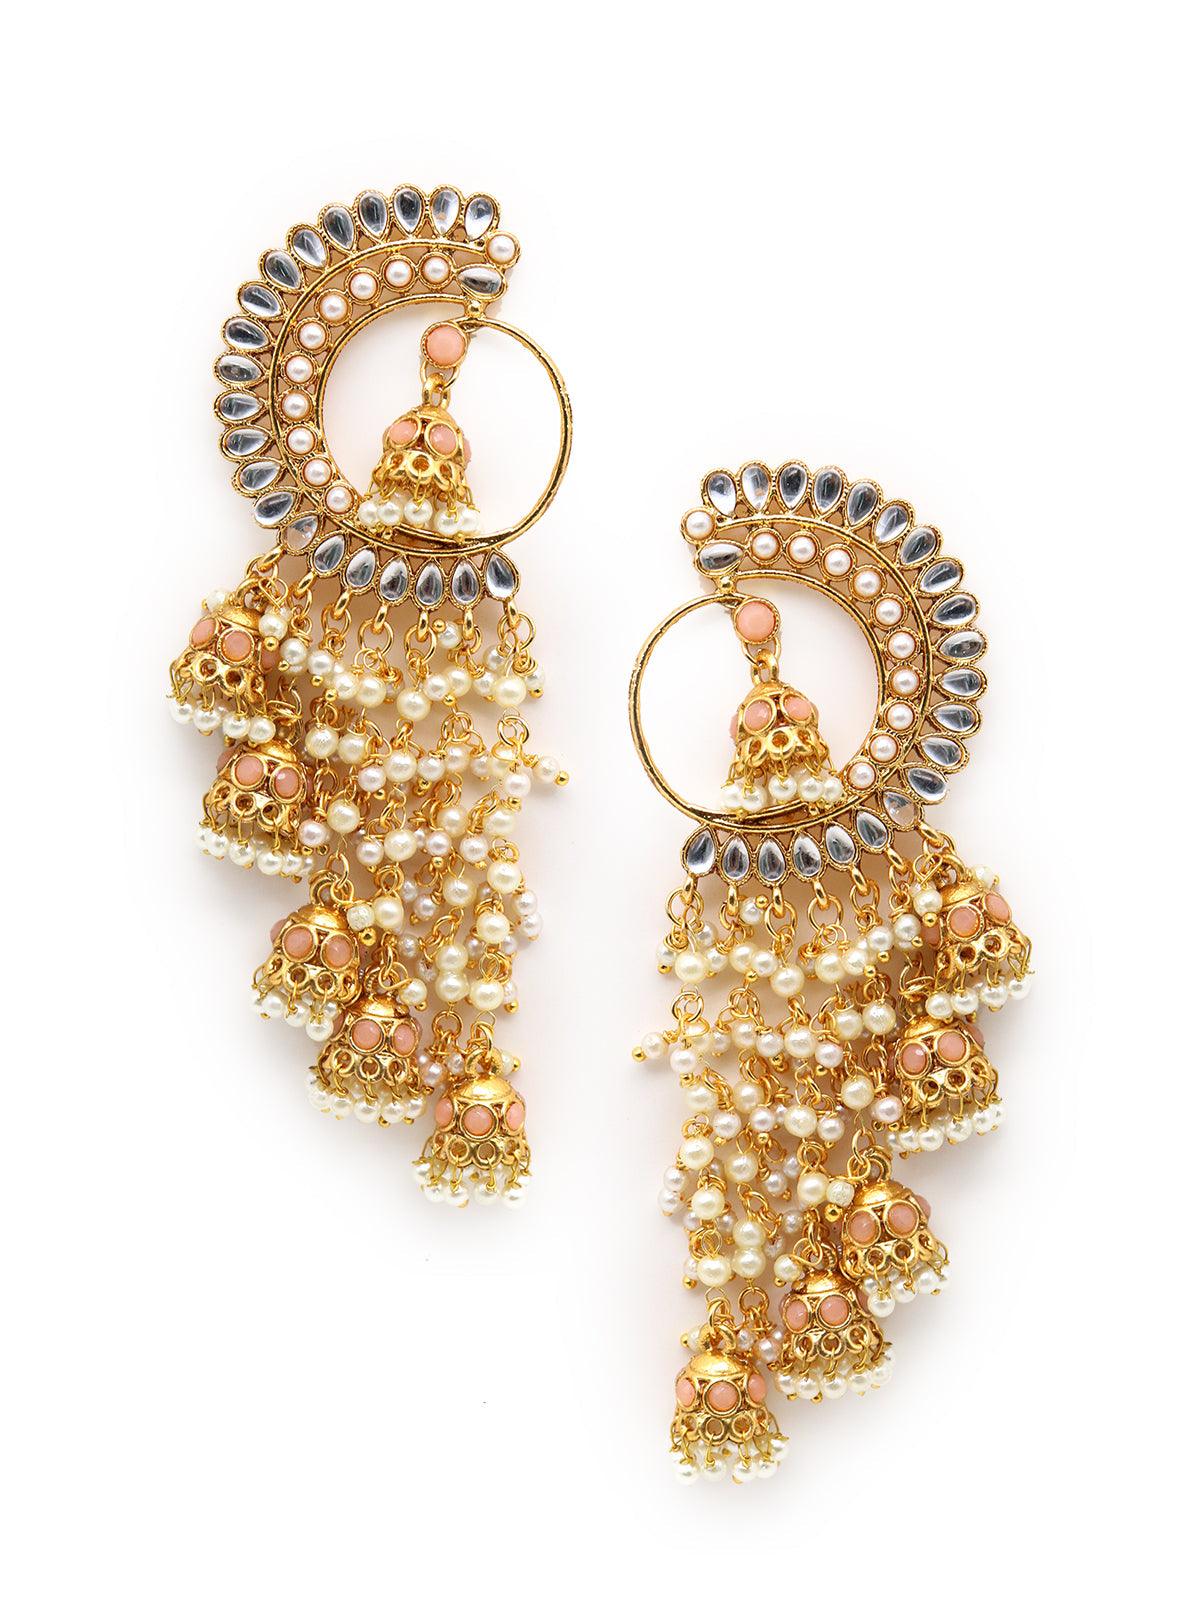 Women's Round And Half- Moon Ornate Kundan-Pearl Peach Earrings With Jhumkas - Odette